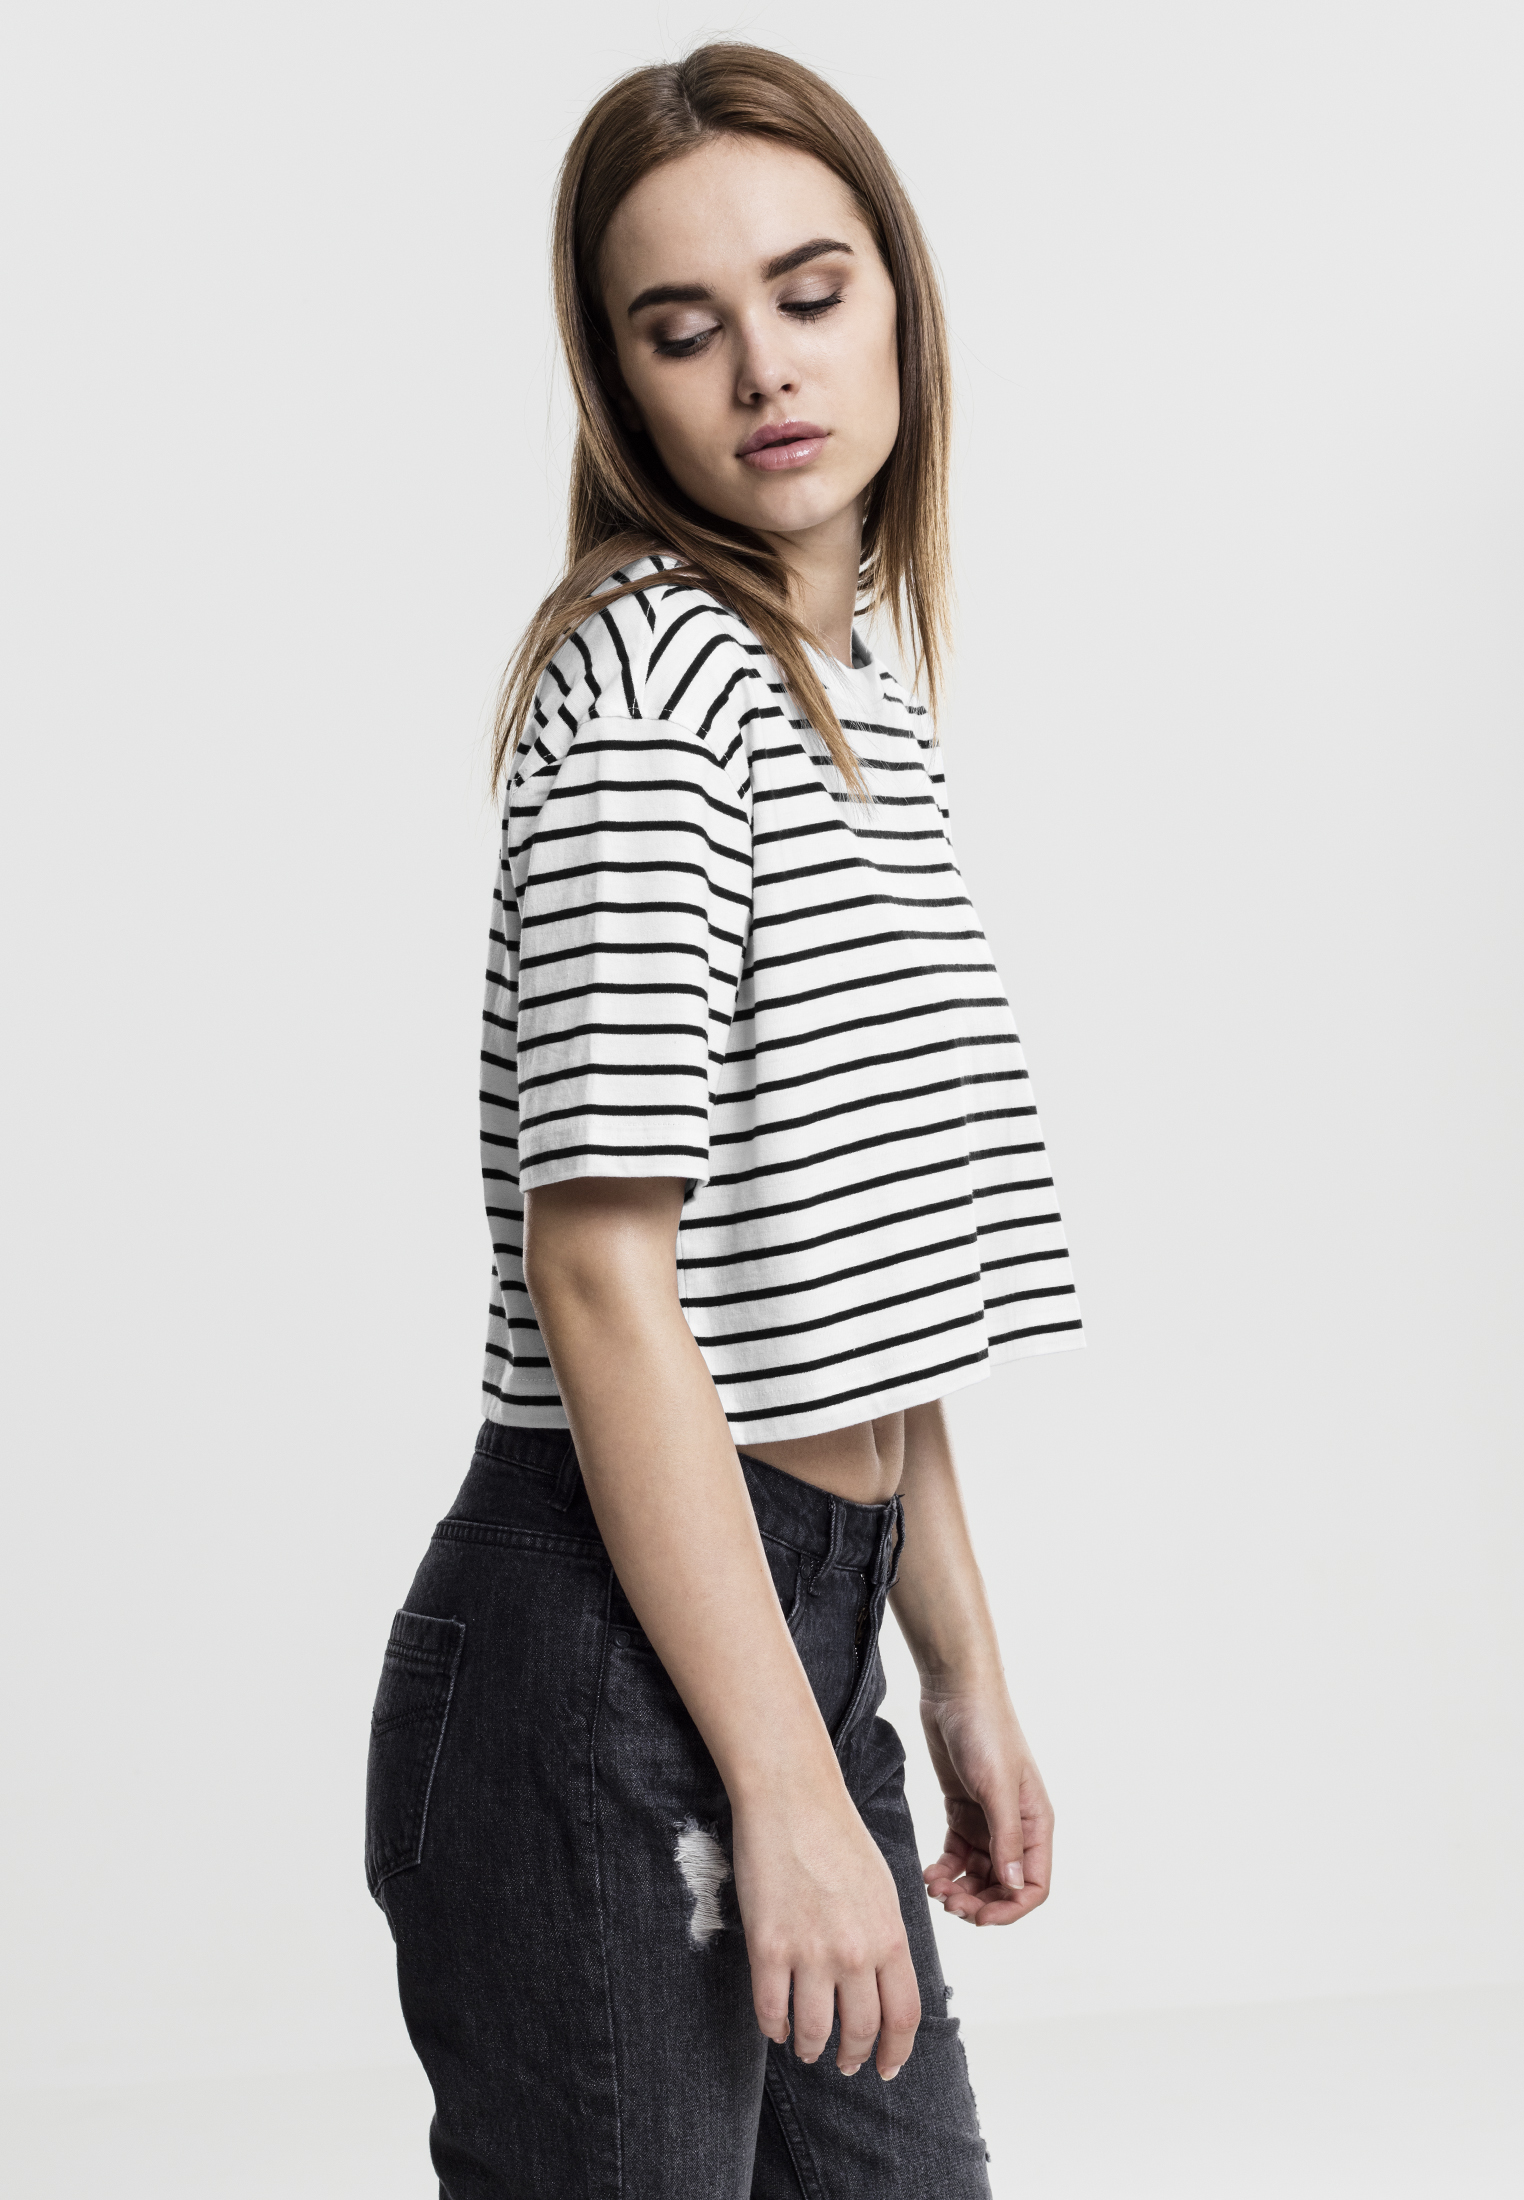 Cropped Tees Ladies Short Striped Oversized Tee in Farbe wht/blk